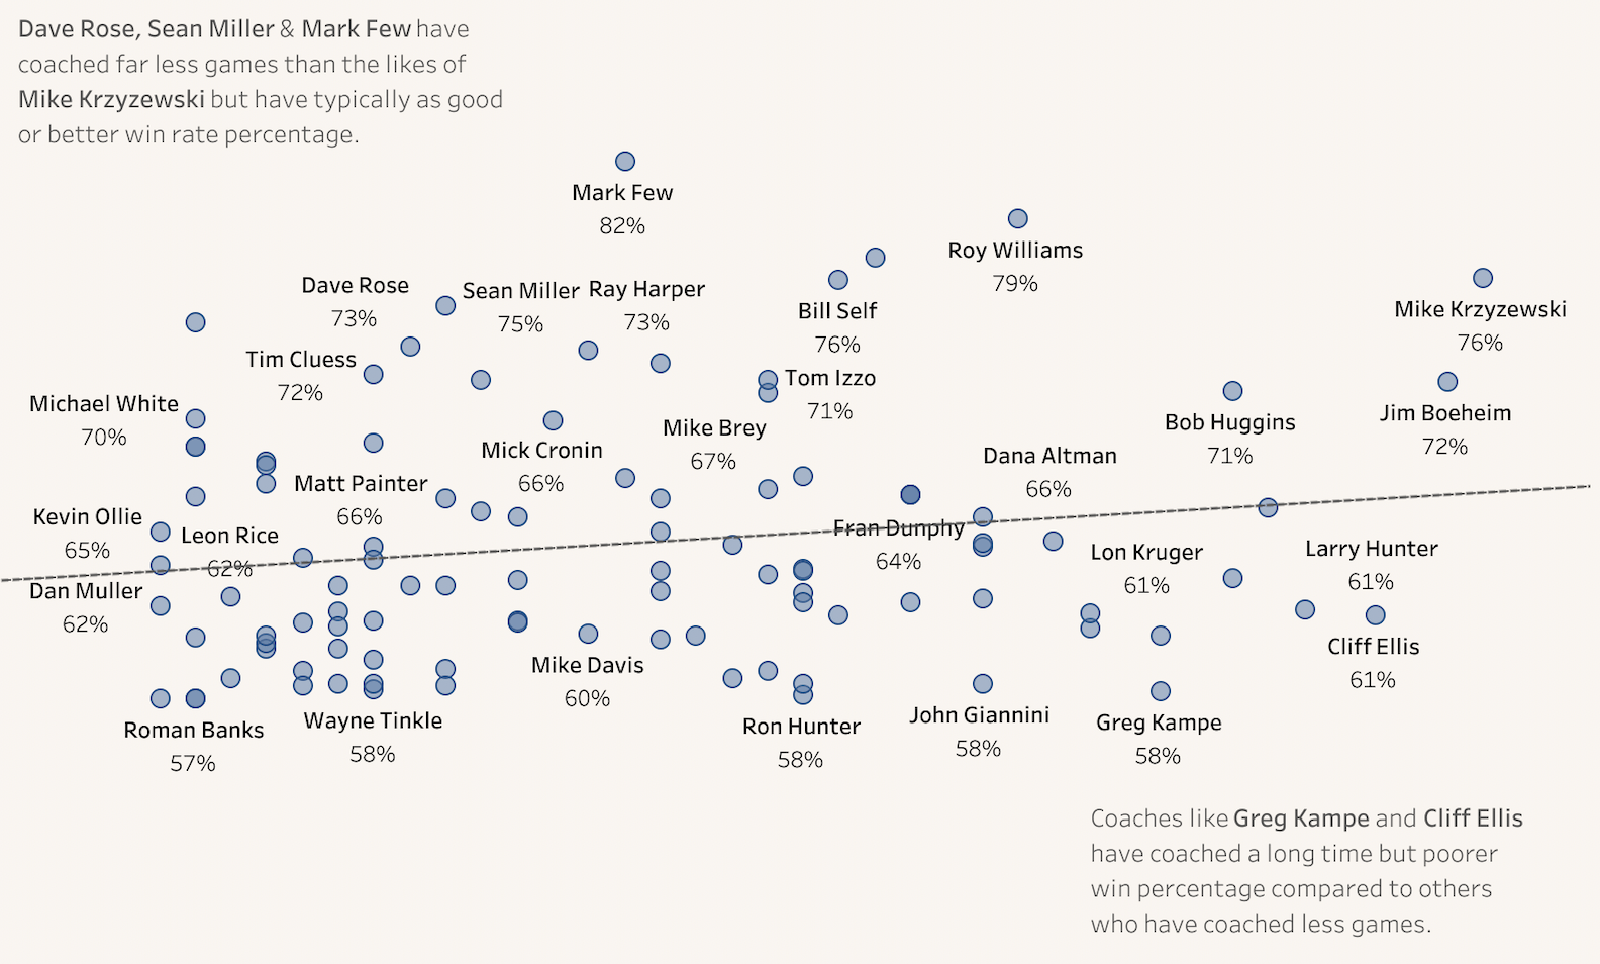 Image of scatter plot visualization showing  American college basketball coaching data.